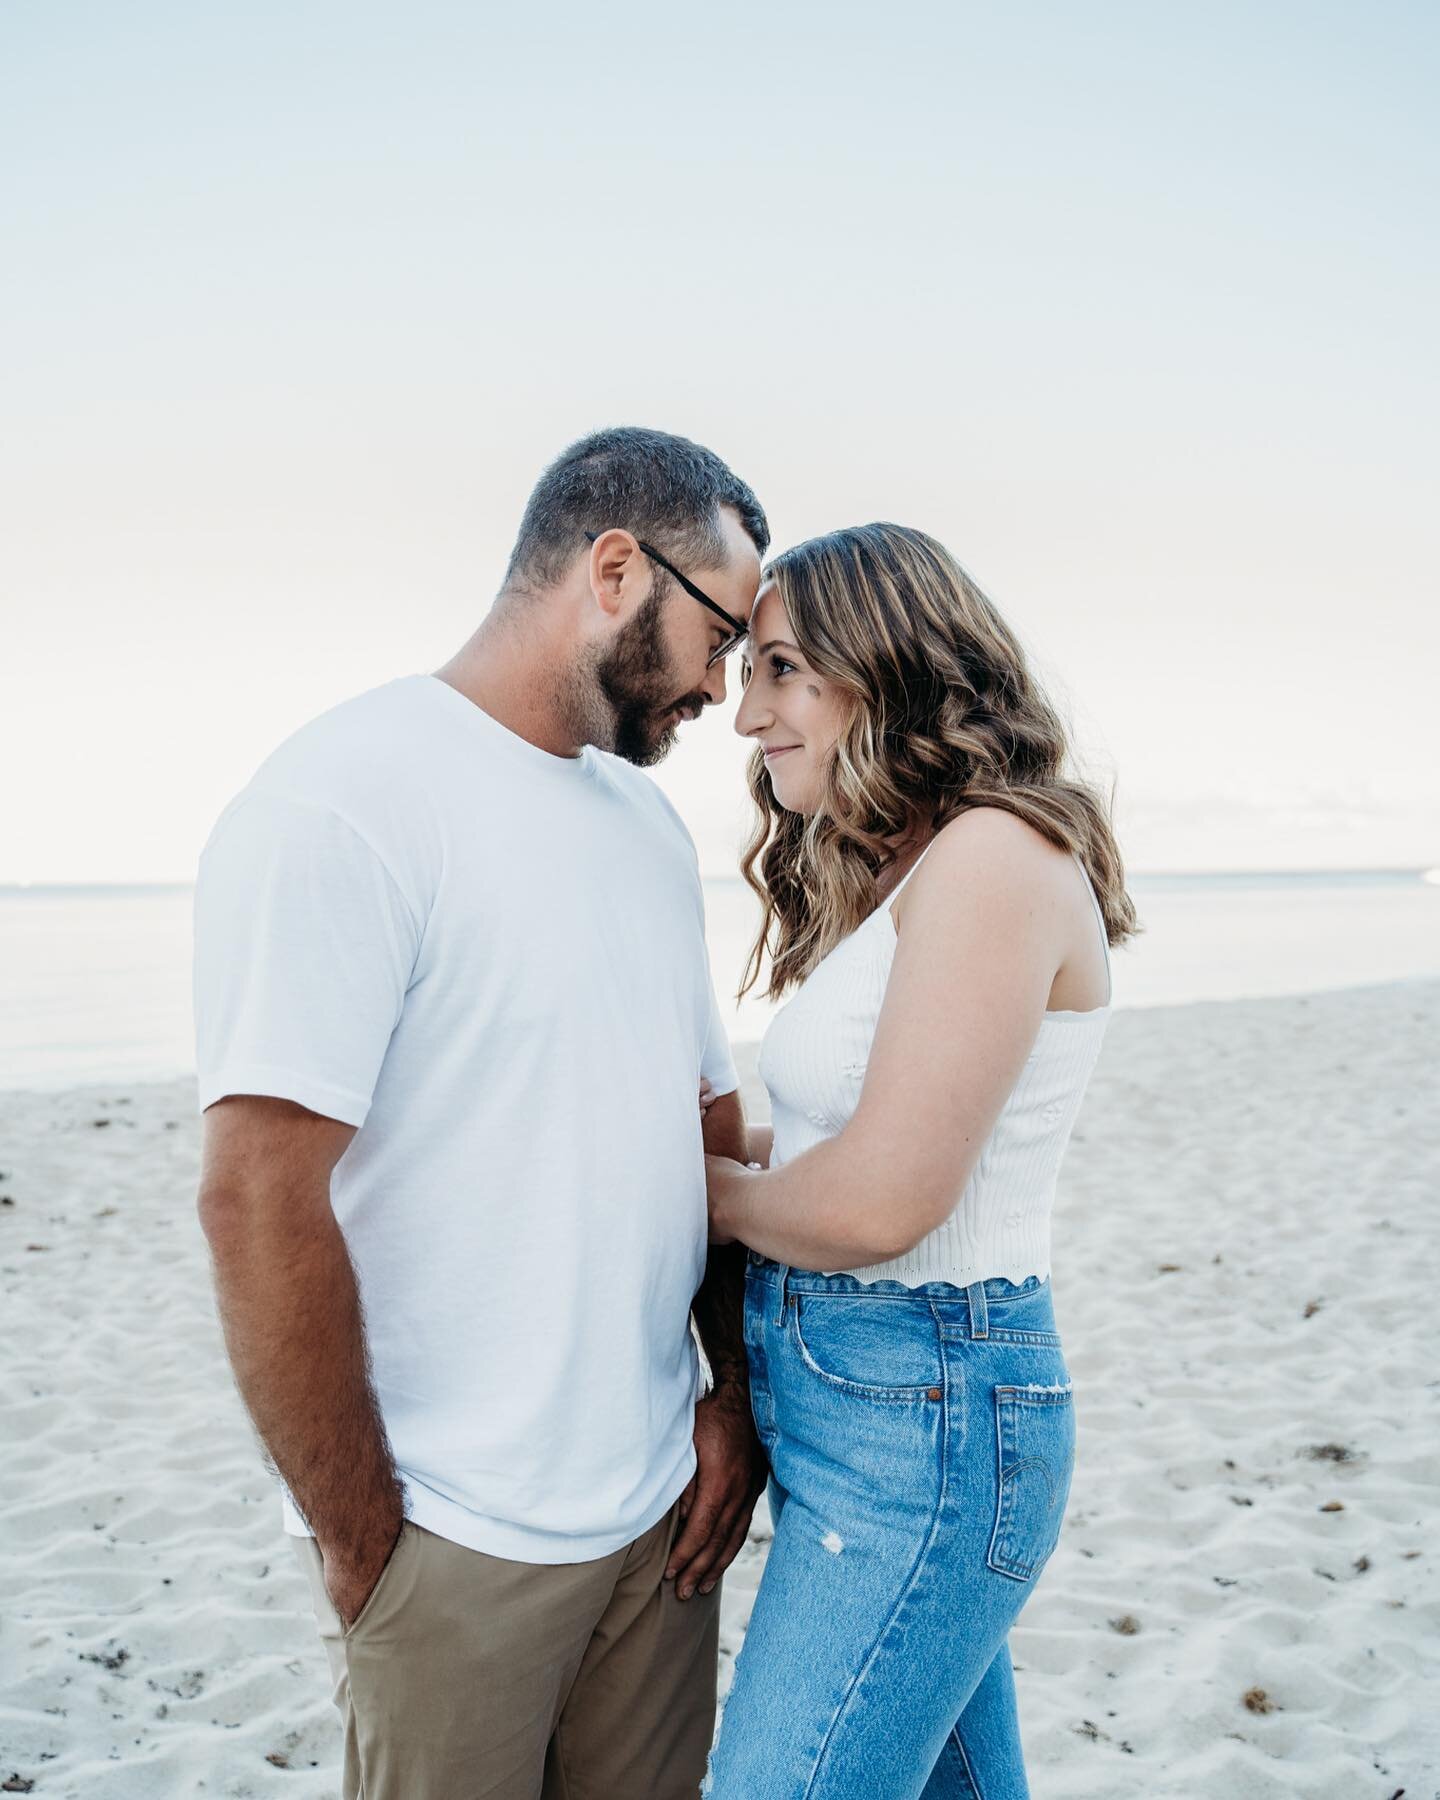 To continue on the engagement photo session theme let&rsquo;s bring it to golden &amp; blue hour on the beach with one of my gorgeous 2023 wedding couples. Did my girl nail the outfit choices or what?!

.

.

.
#capecodweddingphotographer #capecod #c